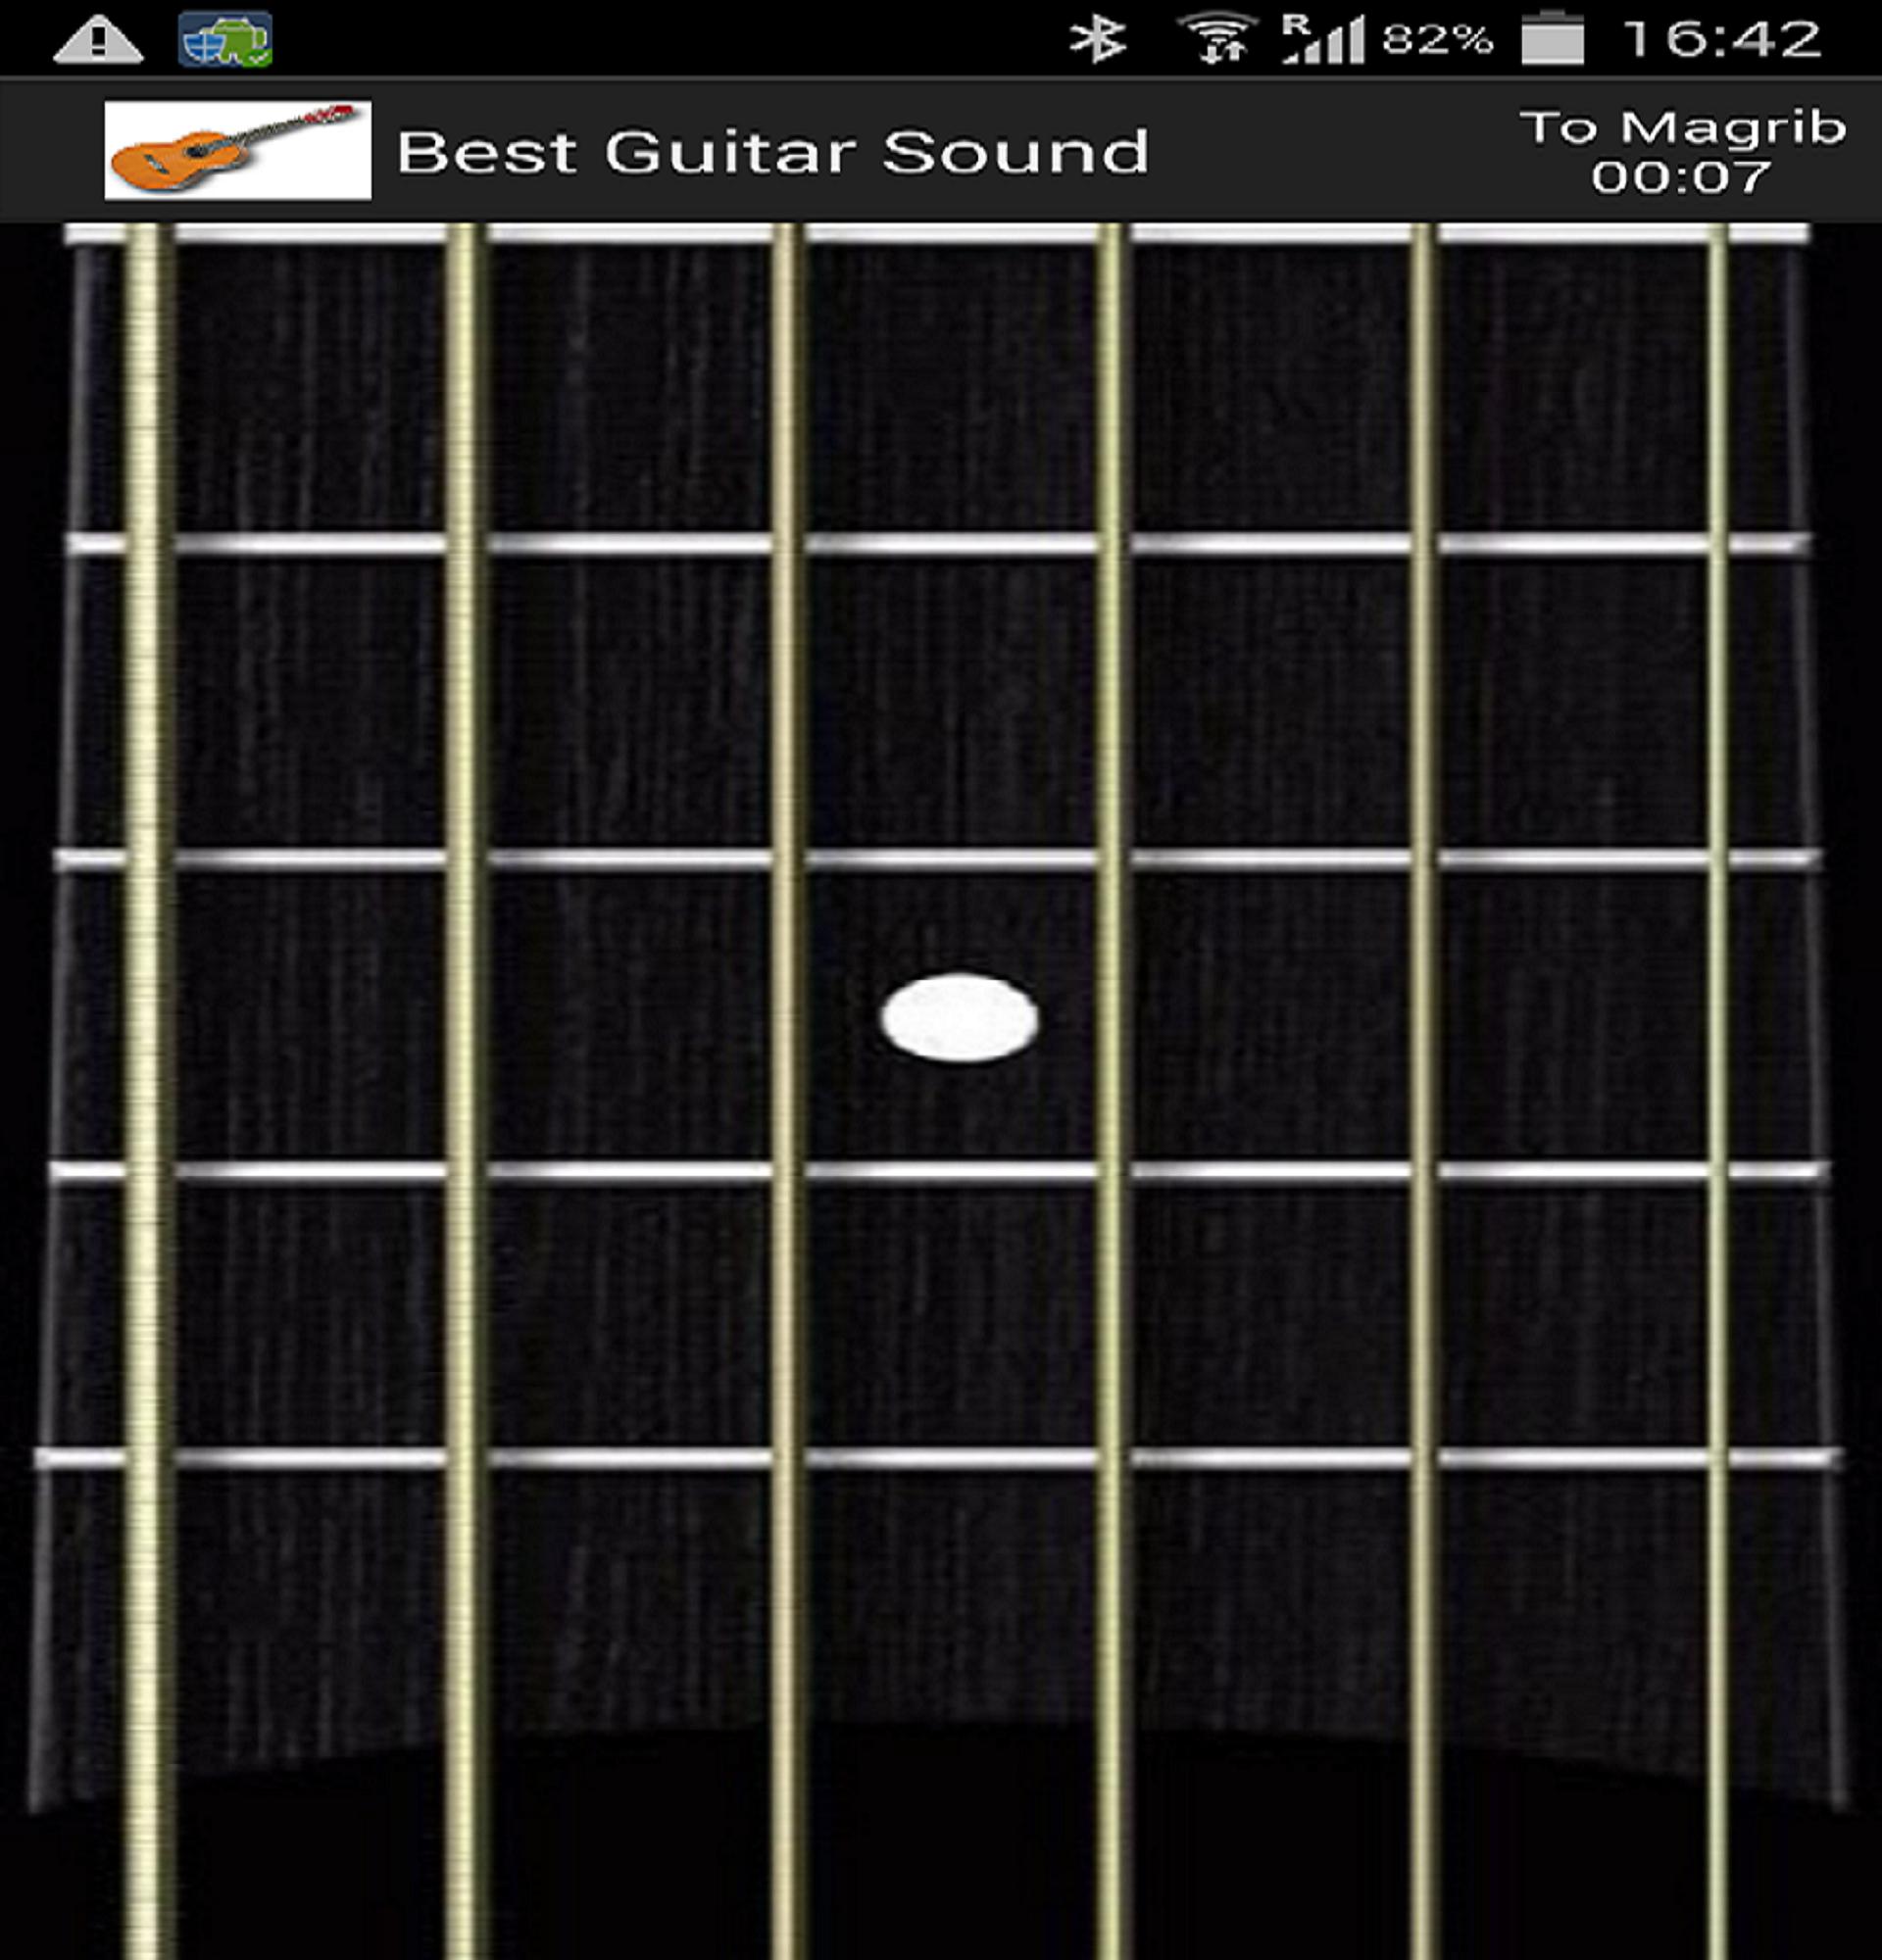 Best guitar sound for Android - APK Download